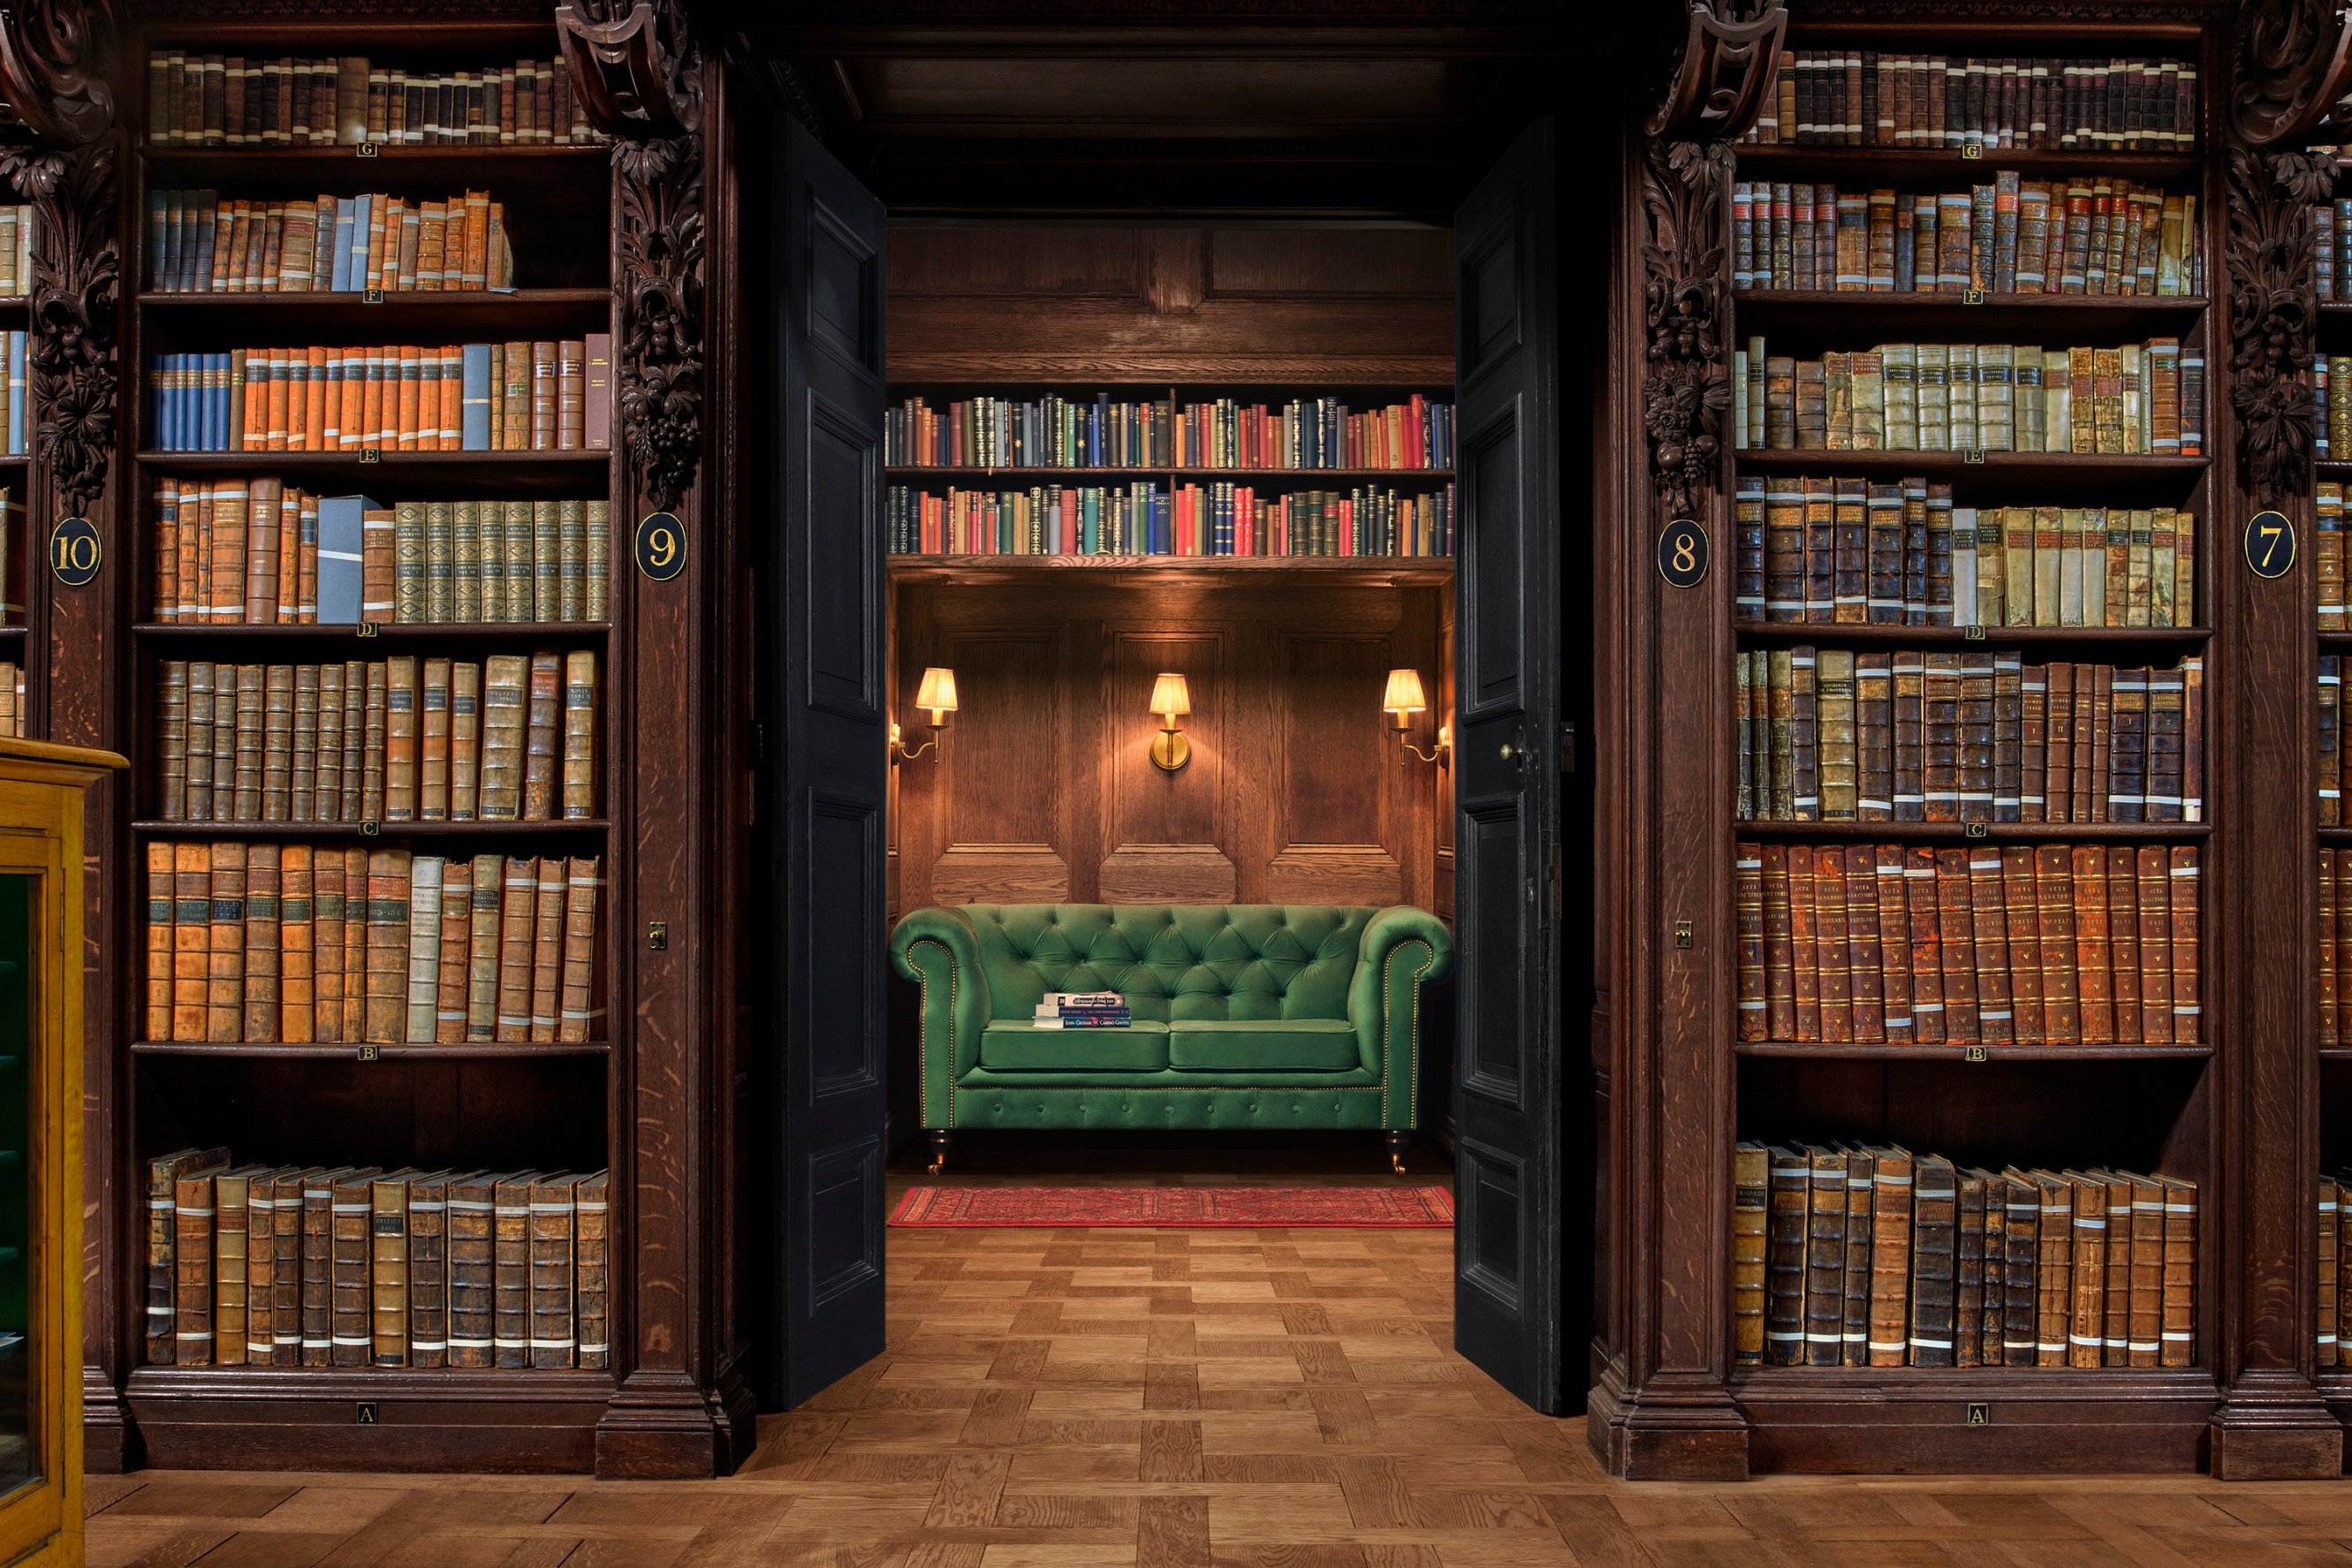 Shot of the reading room in Saint Paul's Cathedral, showing some of the historic volumes and a cosy reading nook with a green sofa.